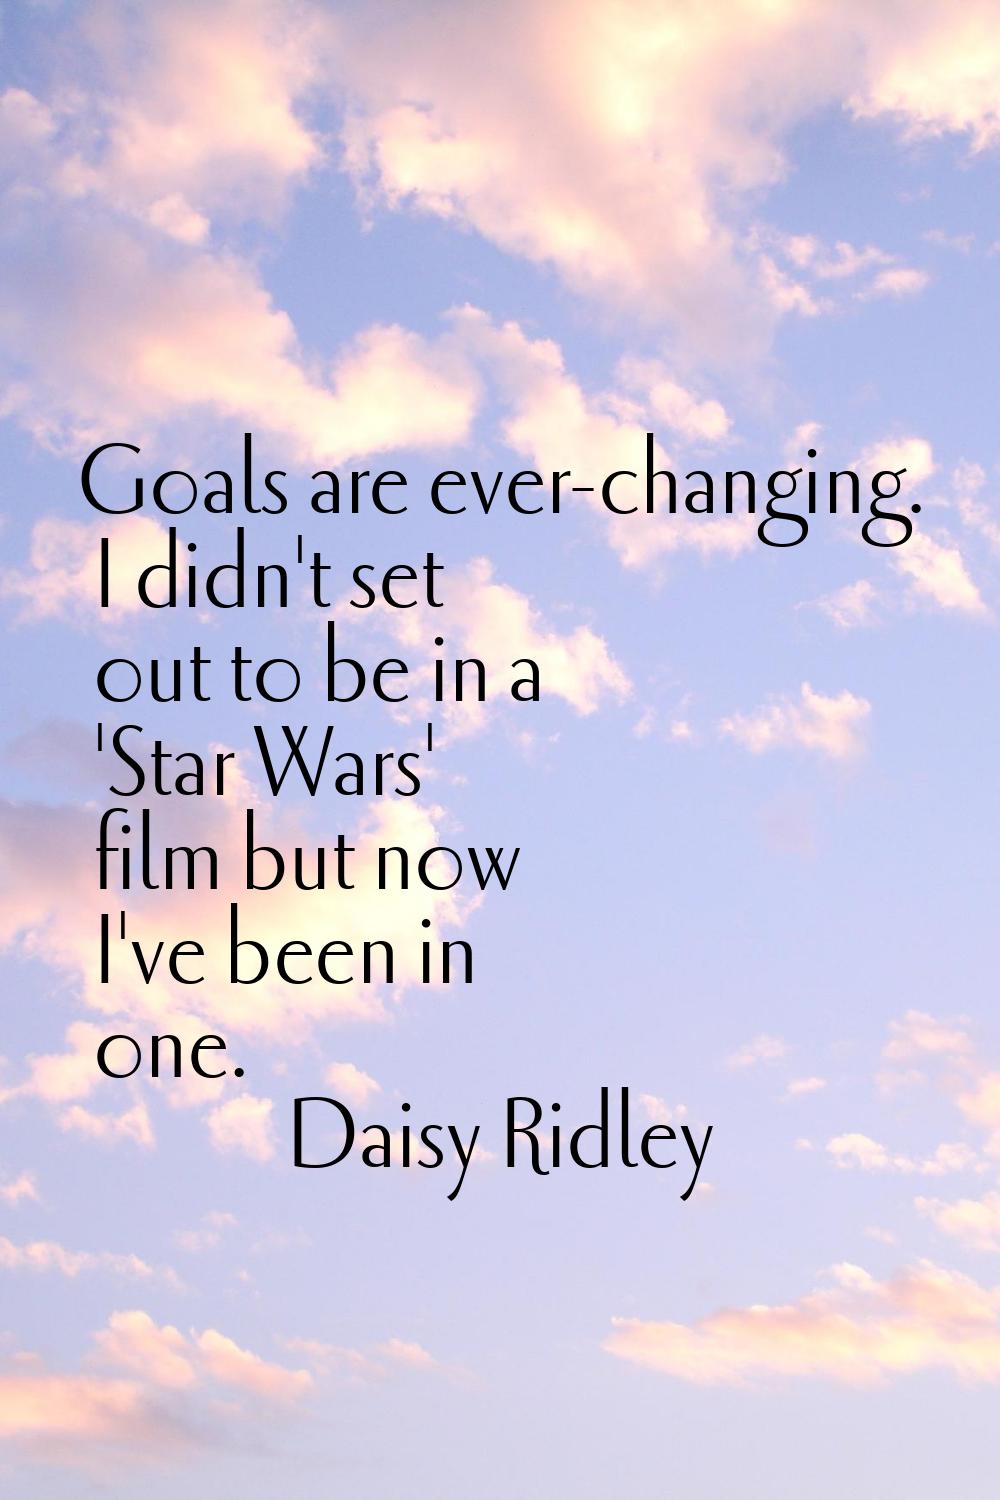 Goals are ever-changing. I didn't set out to be in a 'Star Wars' film but now I've been in one.